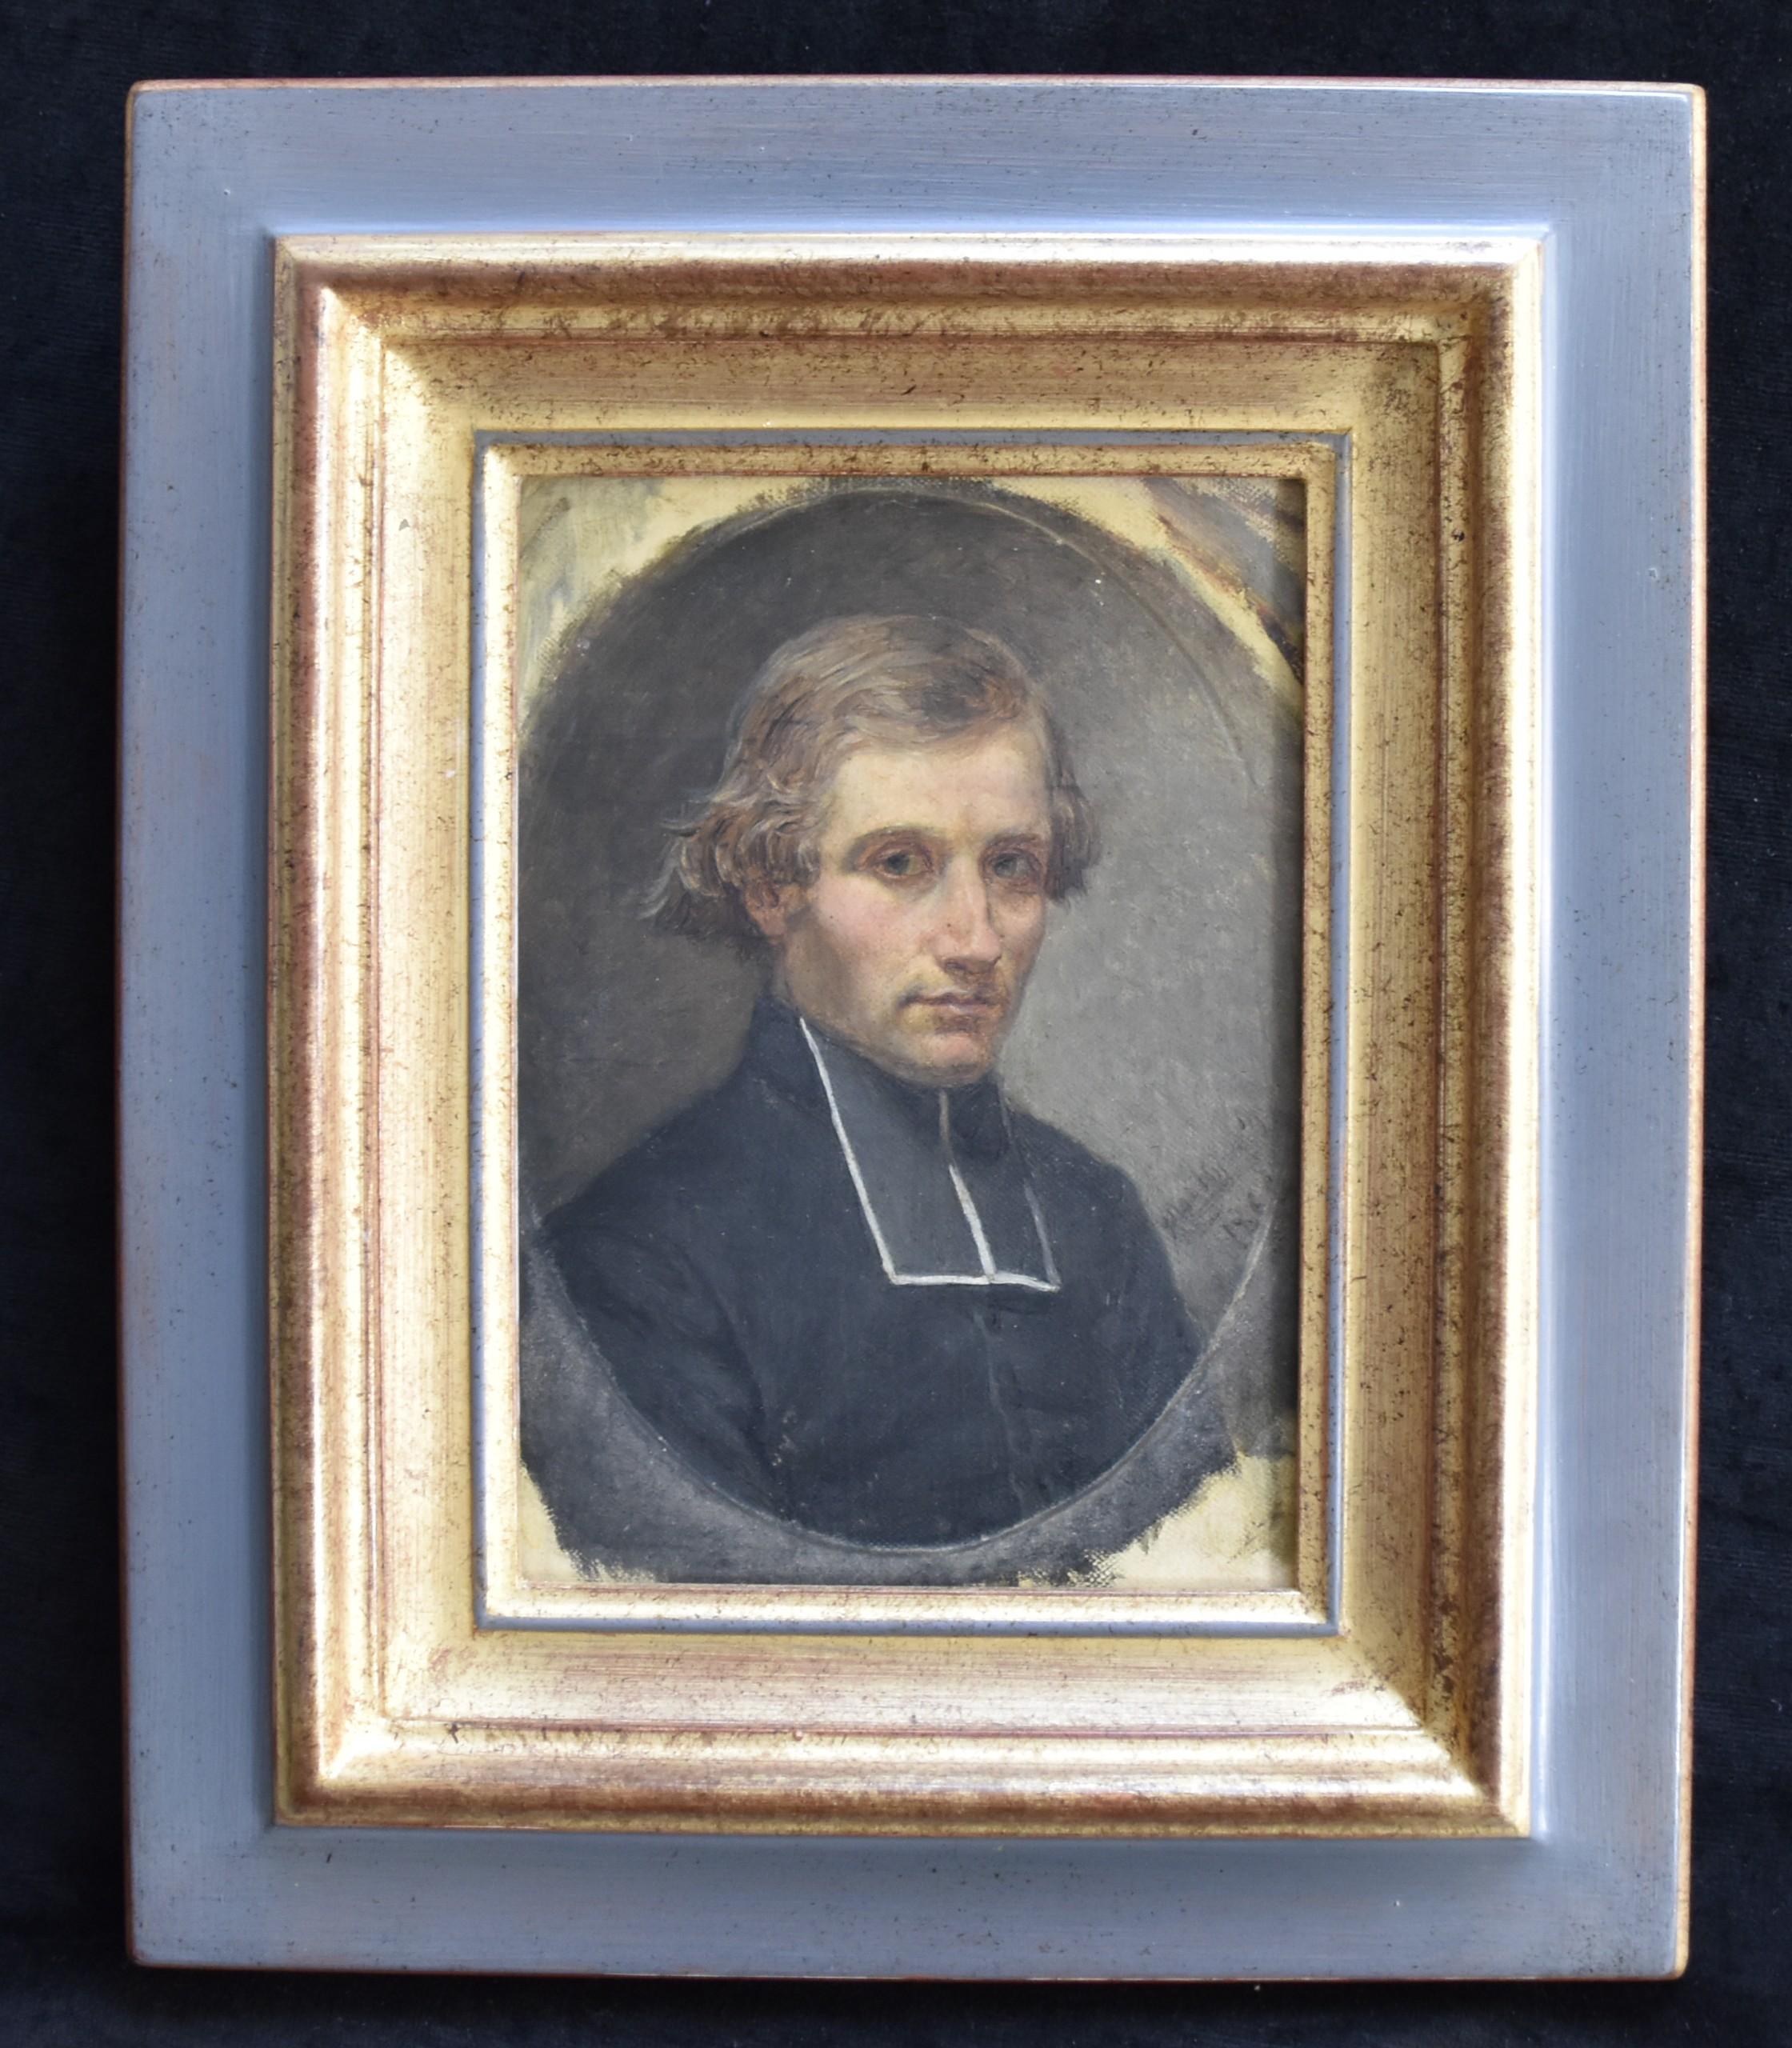 French Romantic School, 
Portrait of a young priest, 1860
Signed (illegible) and dated 1860
oil on canvas
21.5 x 16 cm
In a modern frame :  35 x 29 cm